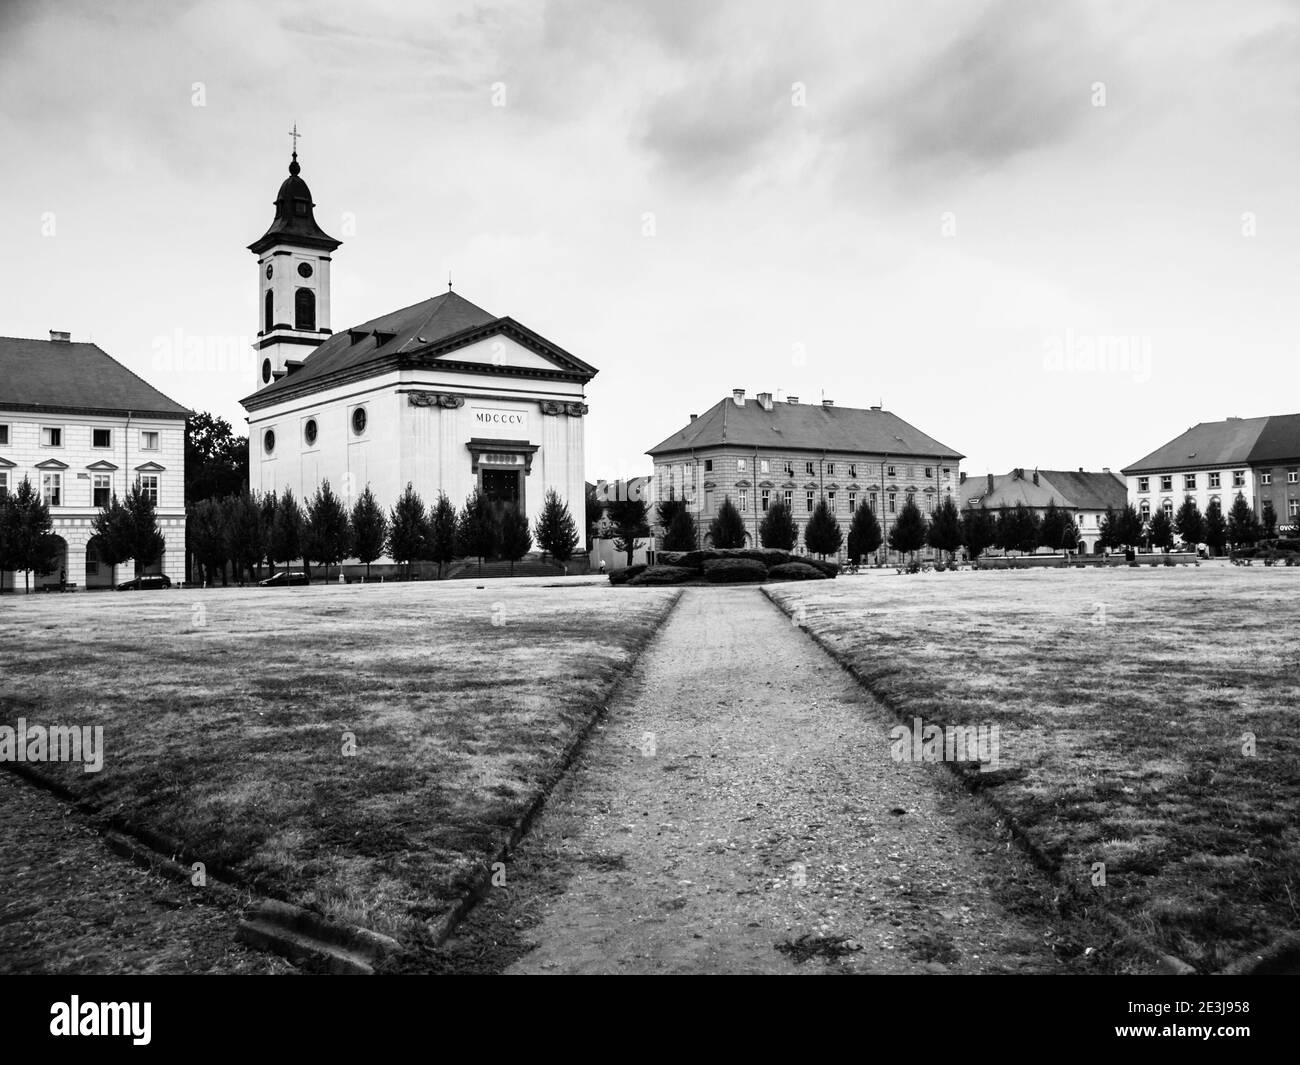 Czechoslovak Army Square with baroque church in Terezin fortress town, Czech Republic, black and white image Stock Photo